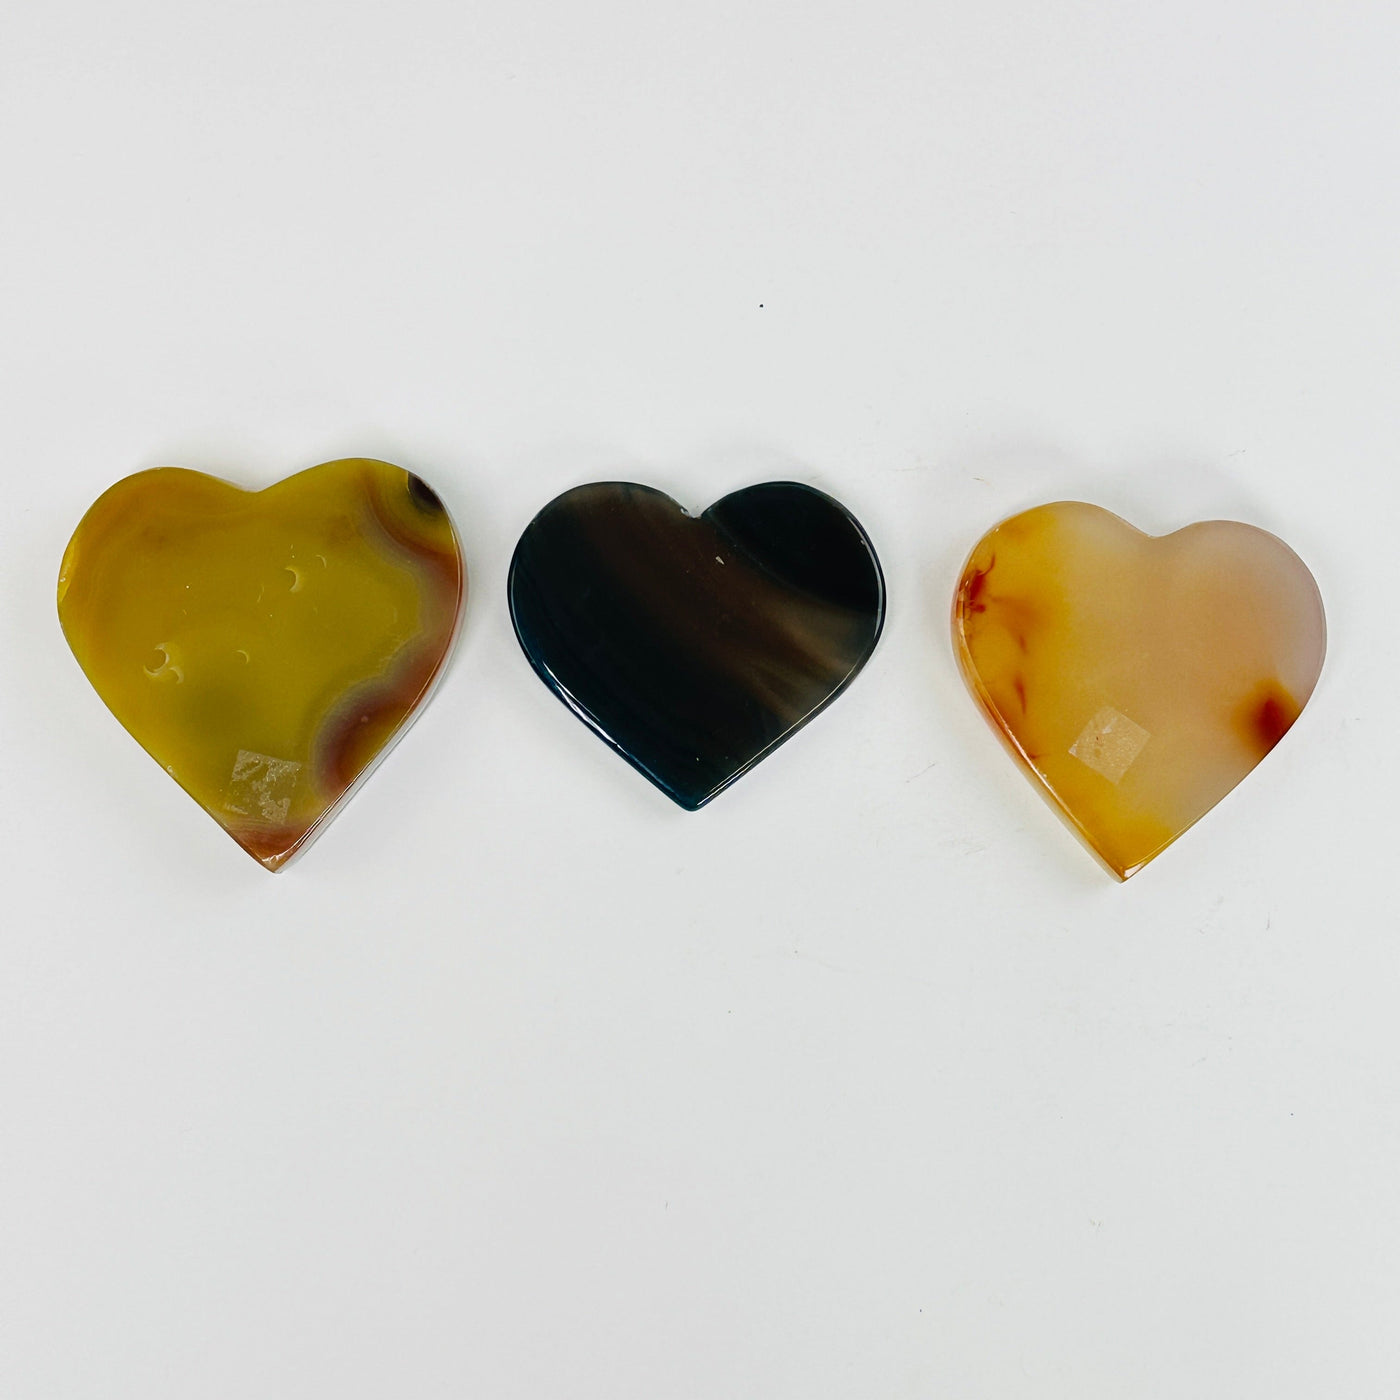 natural agate heart slices on white background